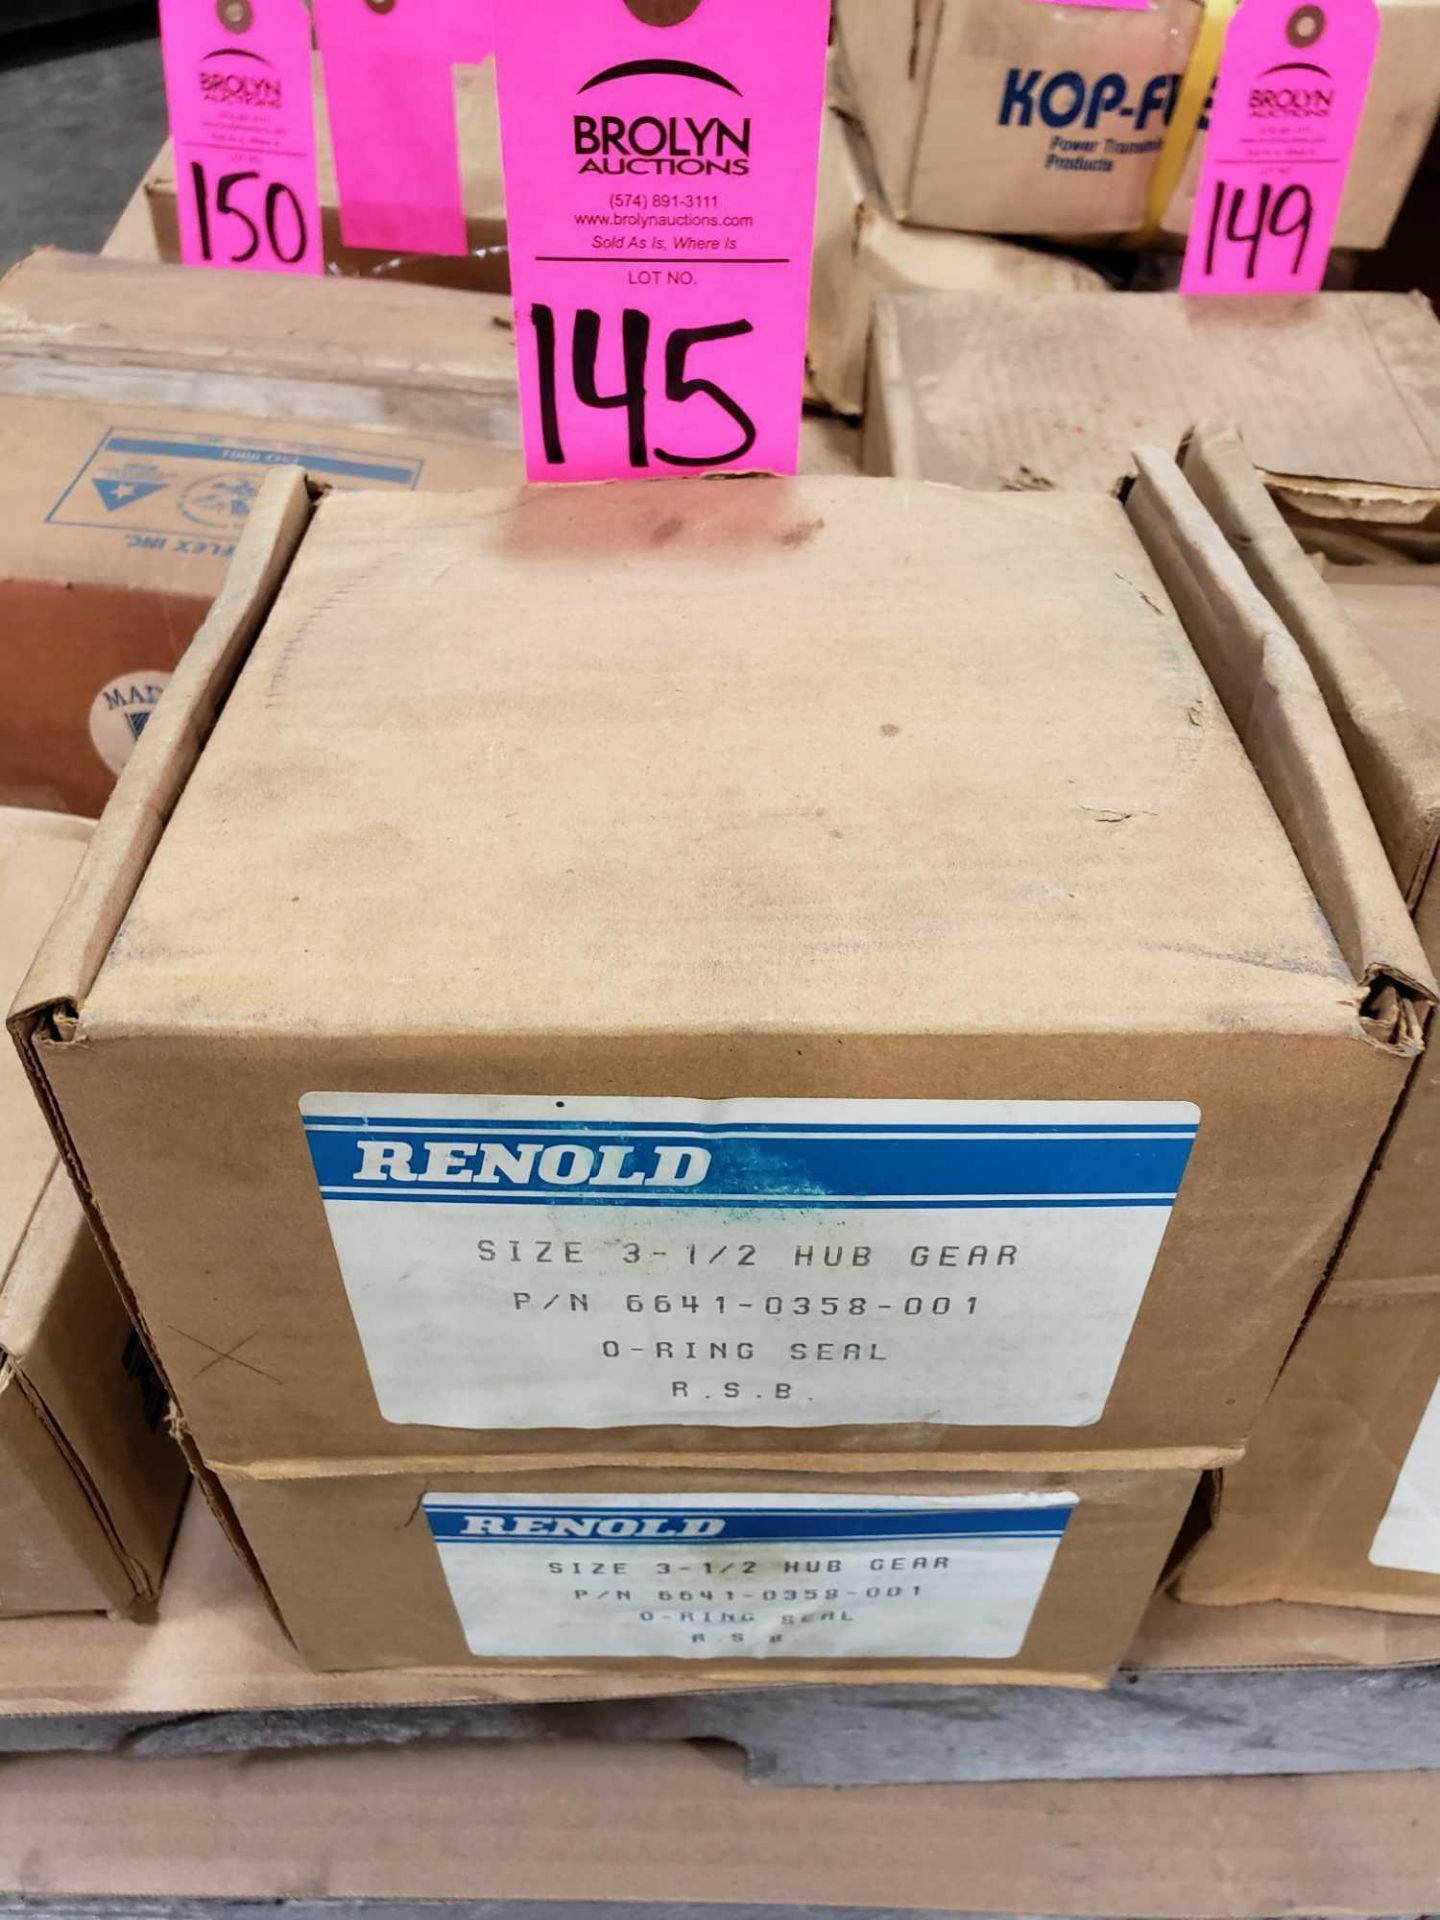 Qty 2 - Renold size 3-1/2 hub gear part number 6641-0358-001. New in box.